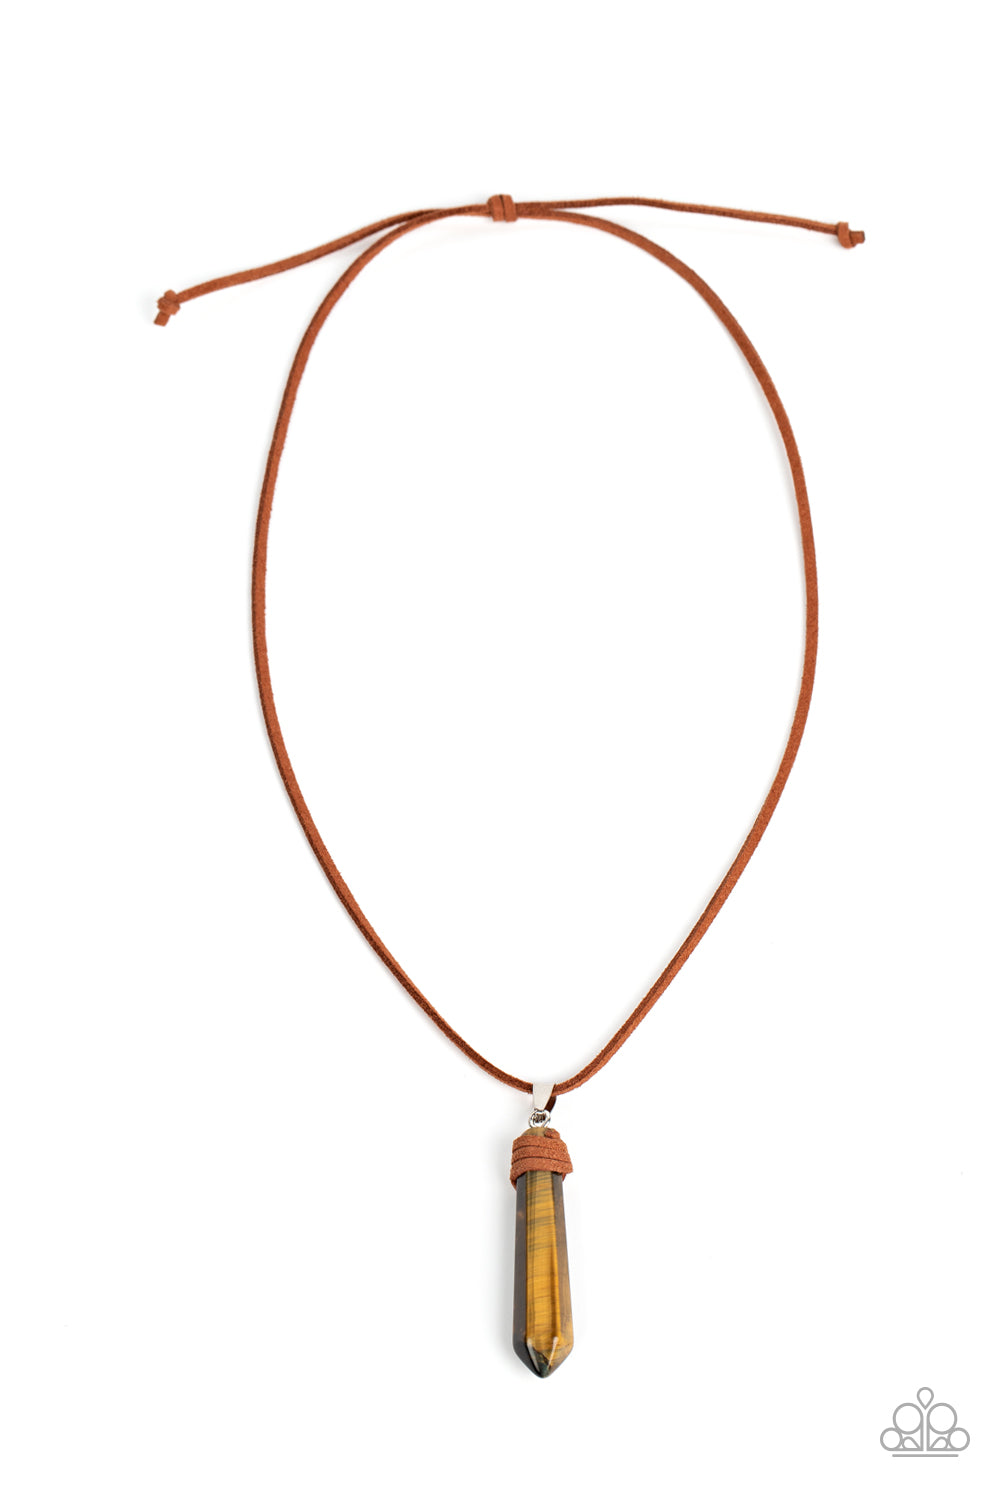 Holistic Harmony - Brown (Tiger's Eye) Necklace